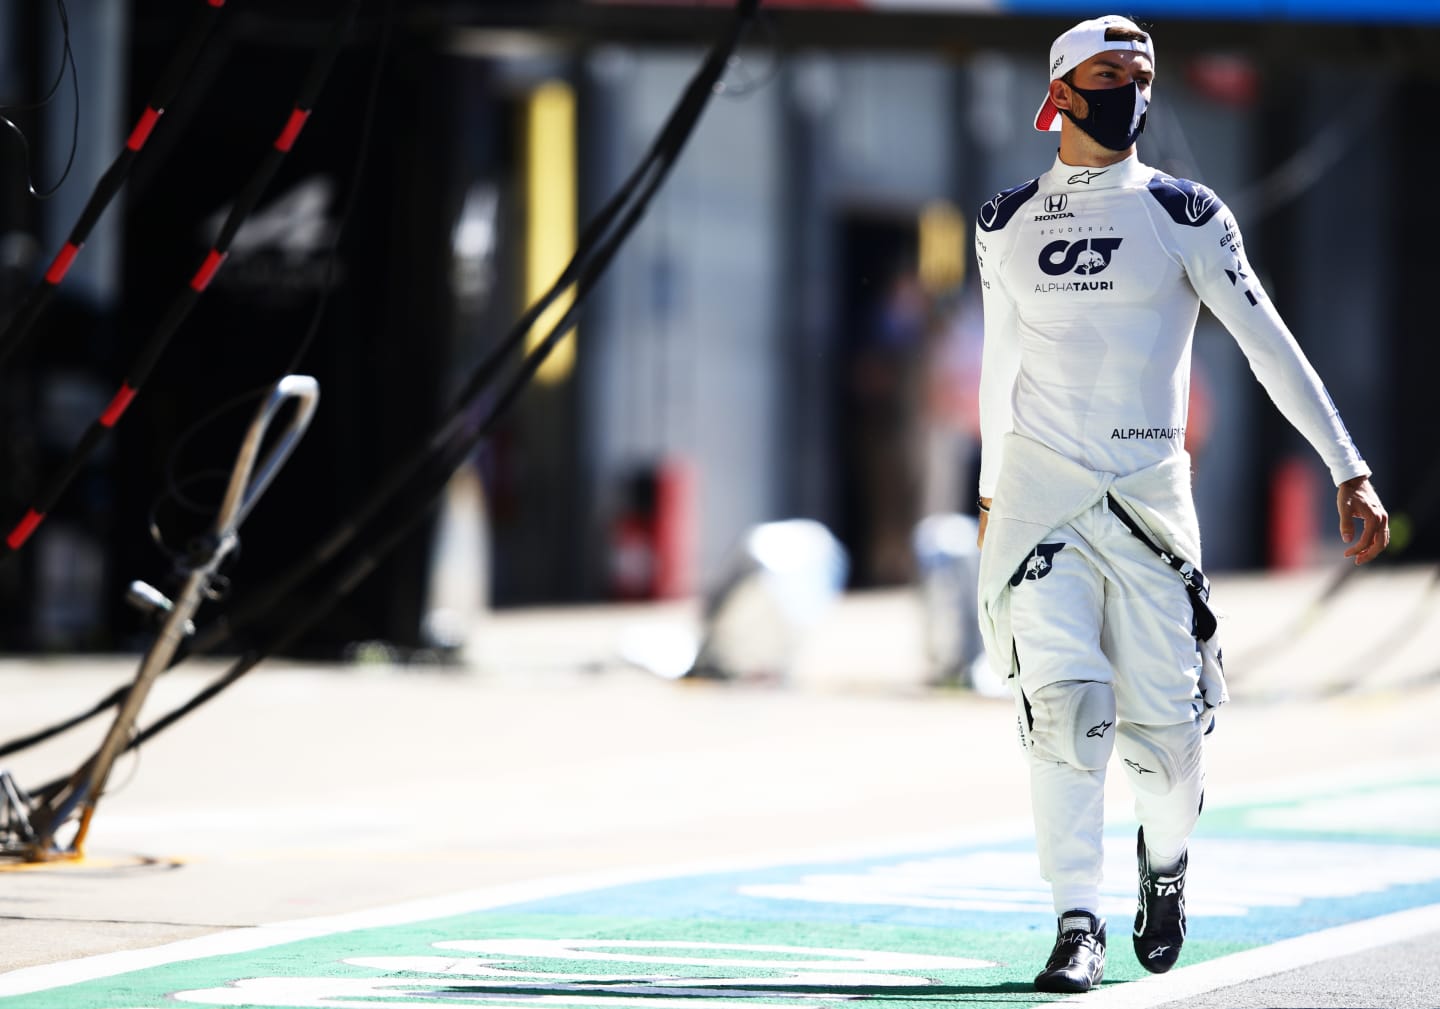 NORTHAMPTON, ENGLAND - JULY 17: Pierre Gasly of France and Scuderia AlphaTauri prepares to drive on the grid before the Sprint for the F1 Grand Prix of Great Britain at Silverstone on July 17, 2021 in Northampton, England. (Photo by Mark Thompson/Getty Images)